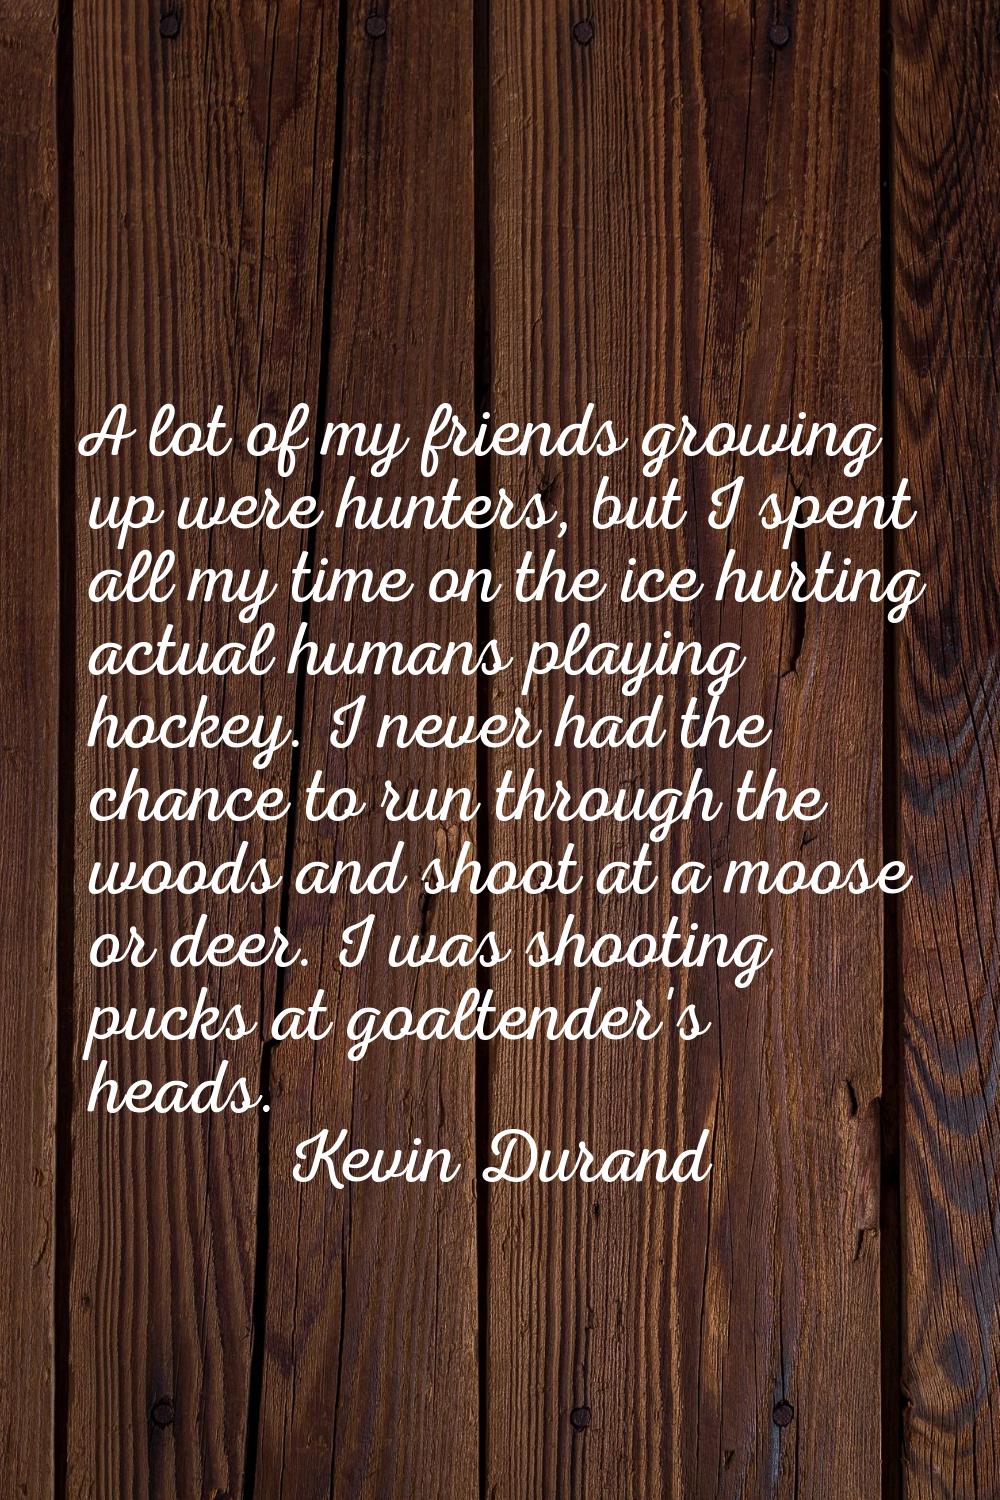 A lot of my friends growing up were hunters, but I spent all my time on the ice hurting actual huma